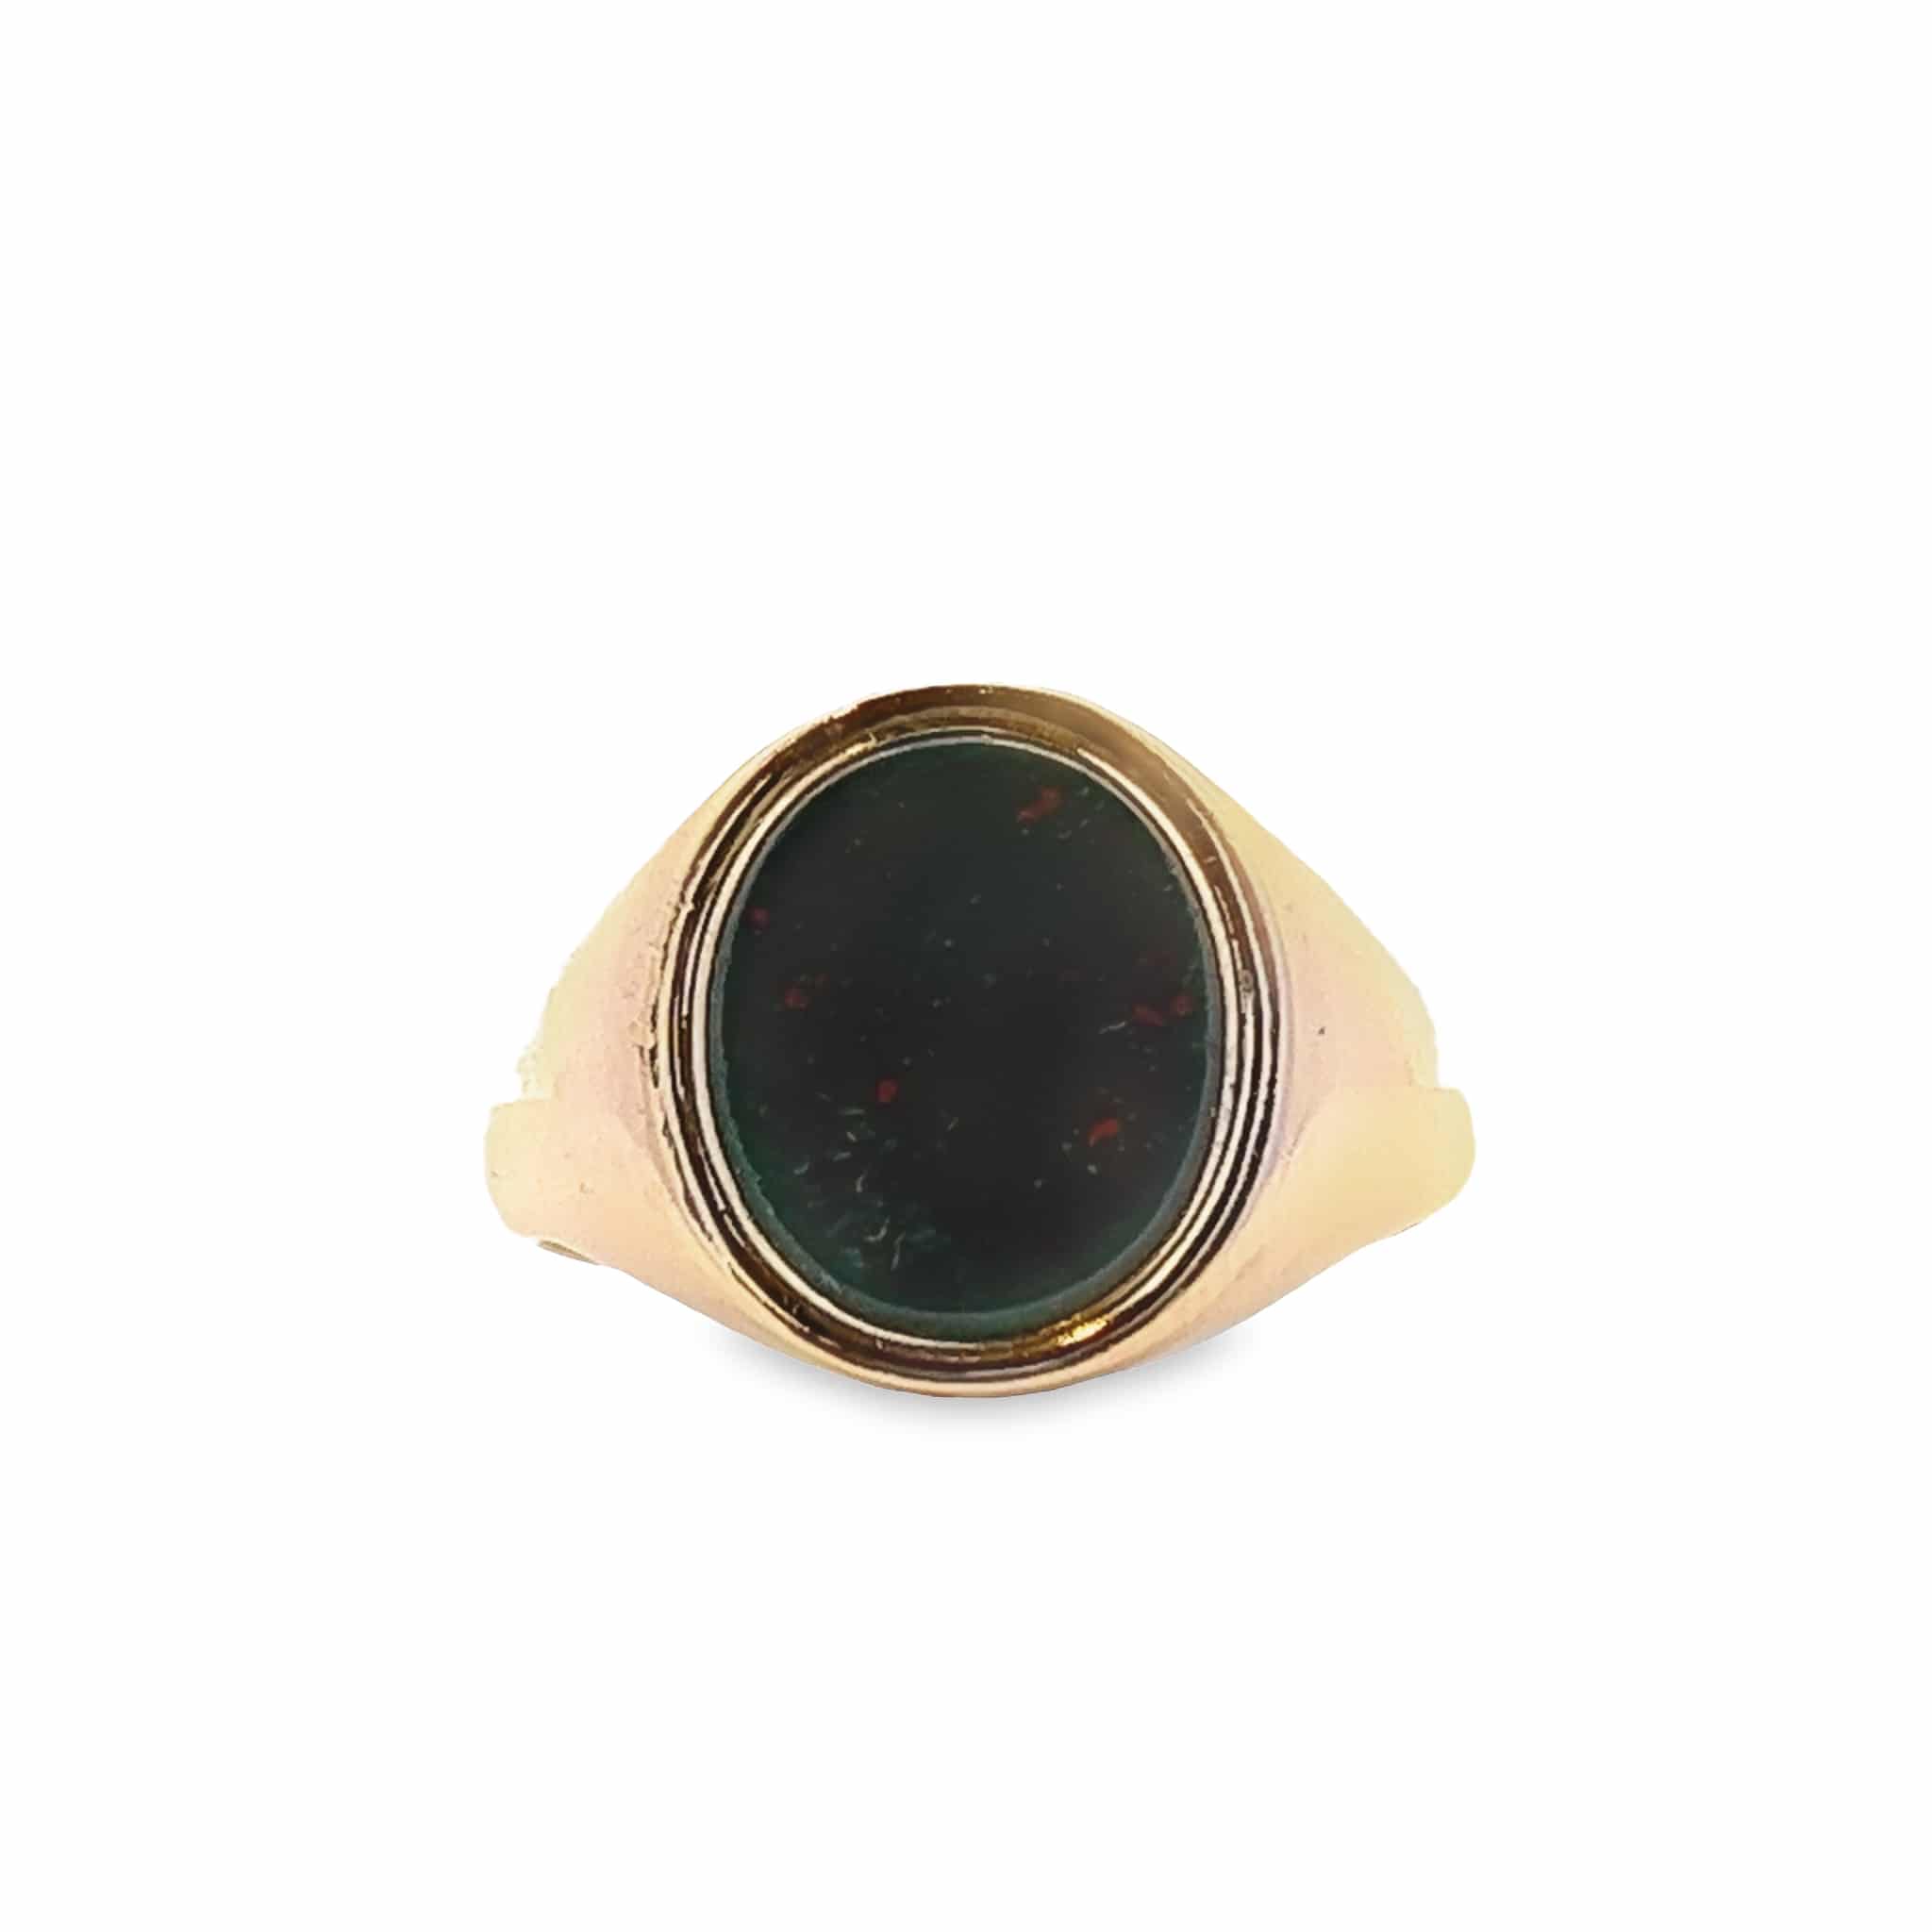 7gm 9ct Gold Gents Signet Ring with Oval Bloodstone – Pre-Owned